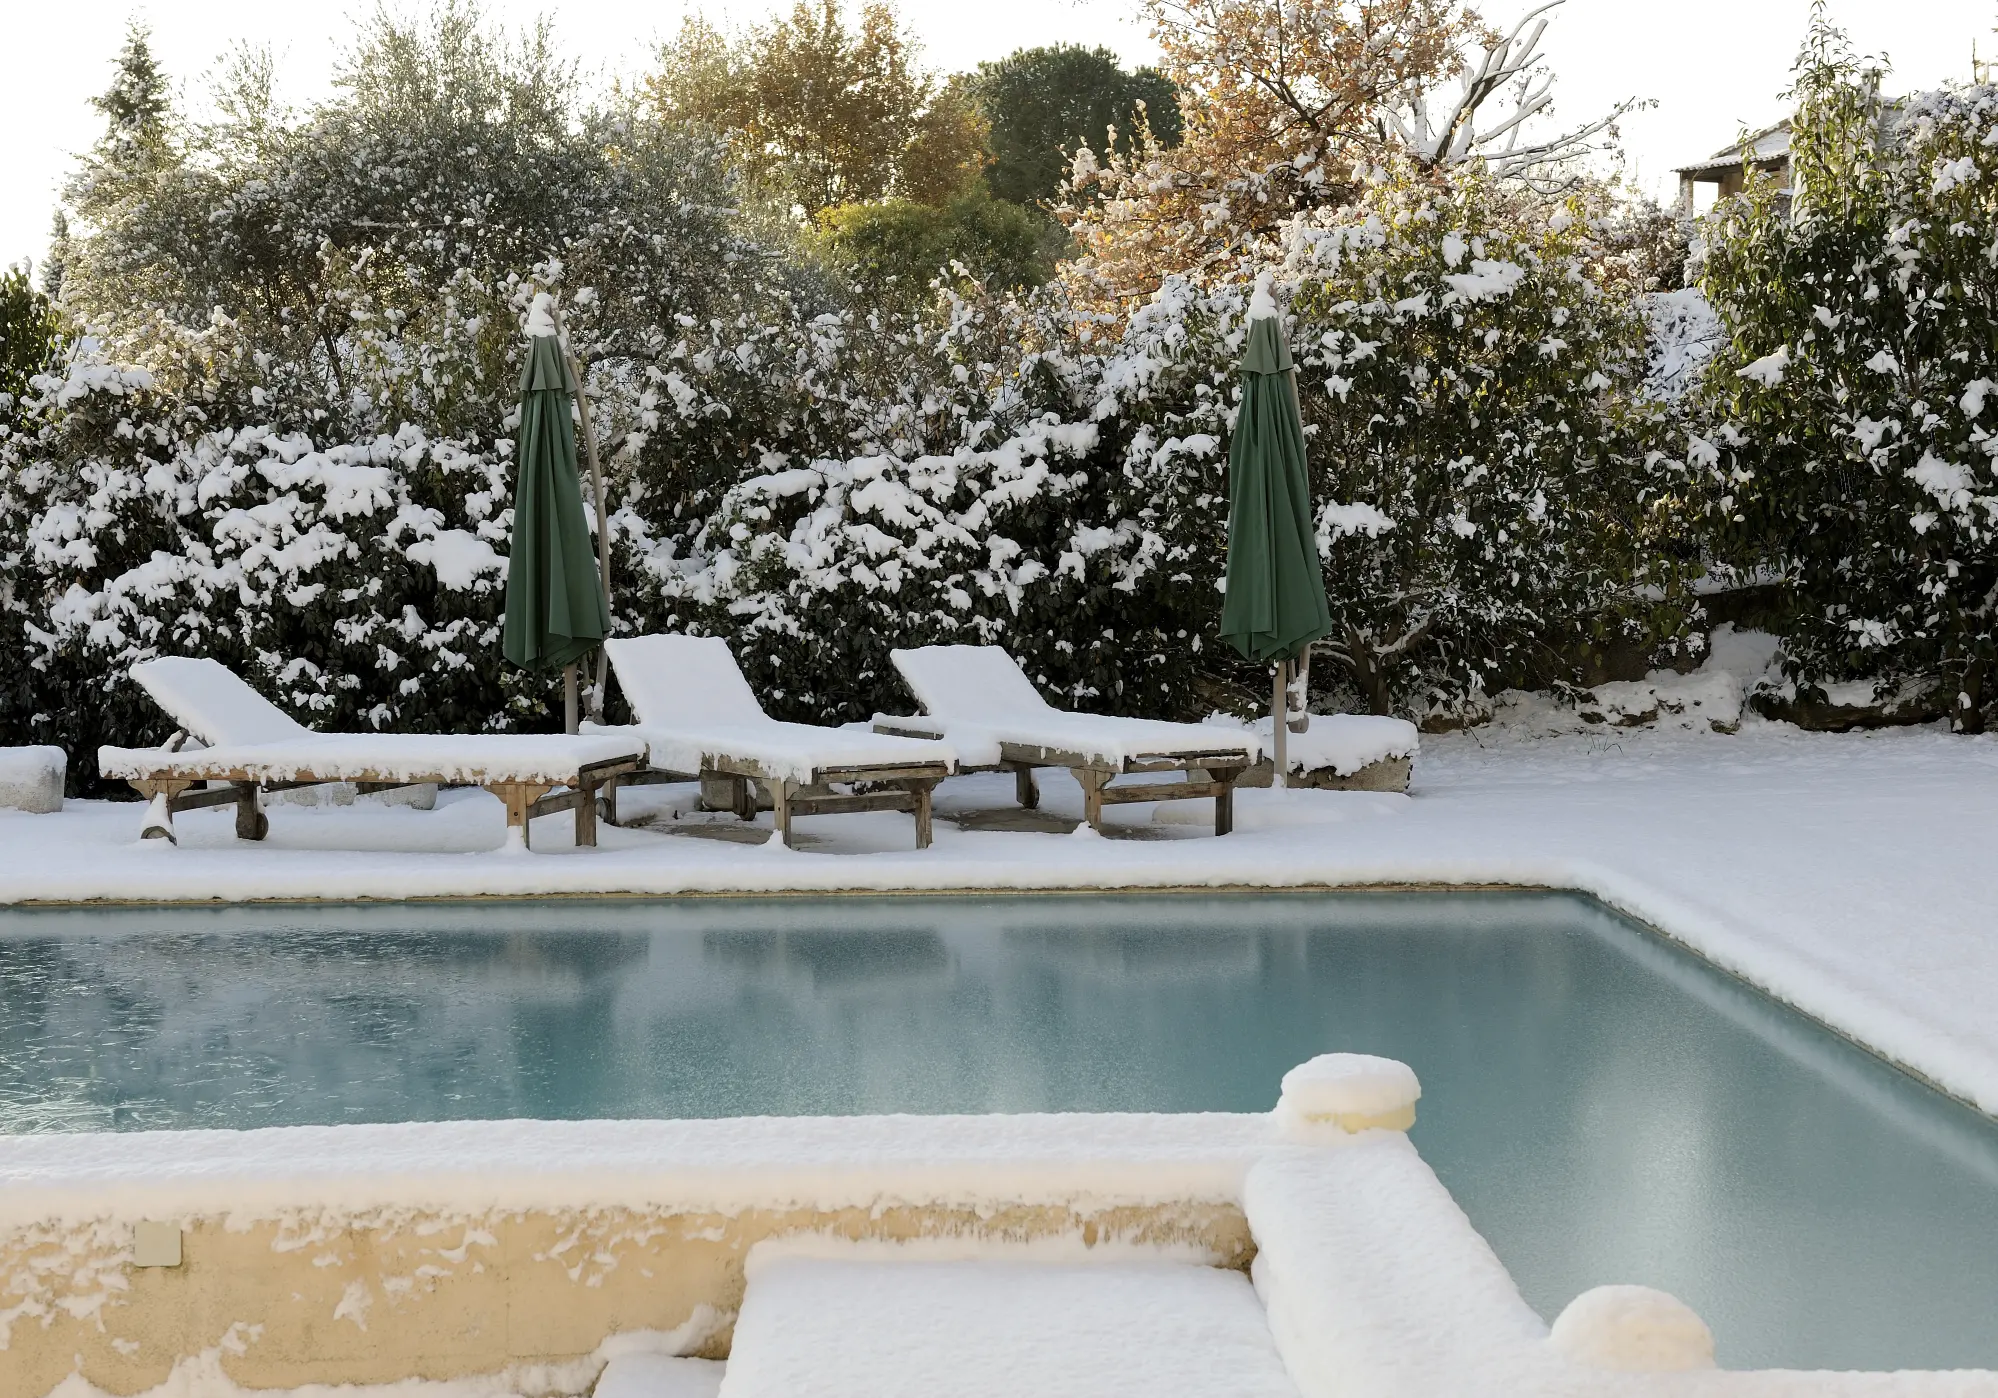 How to Winterize a Swimming Pool